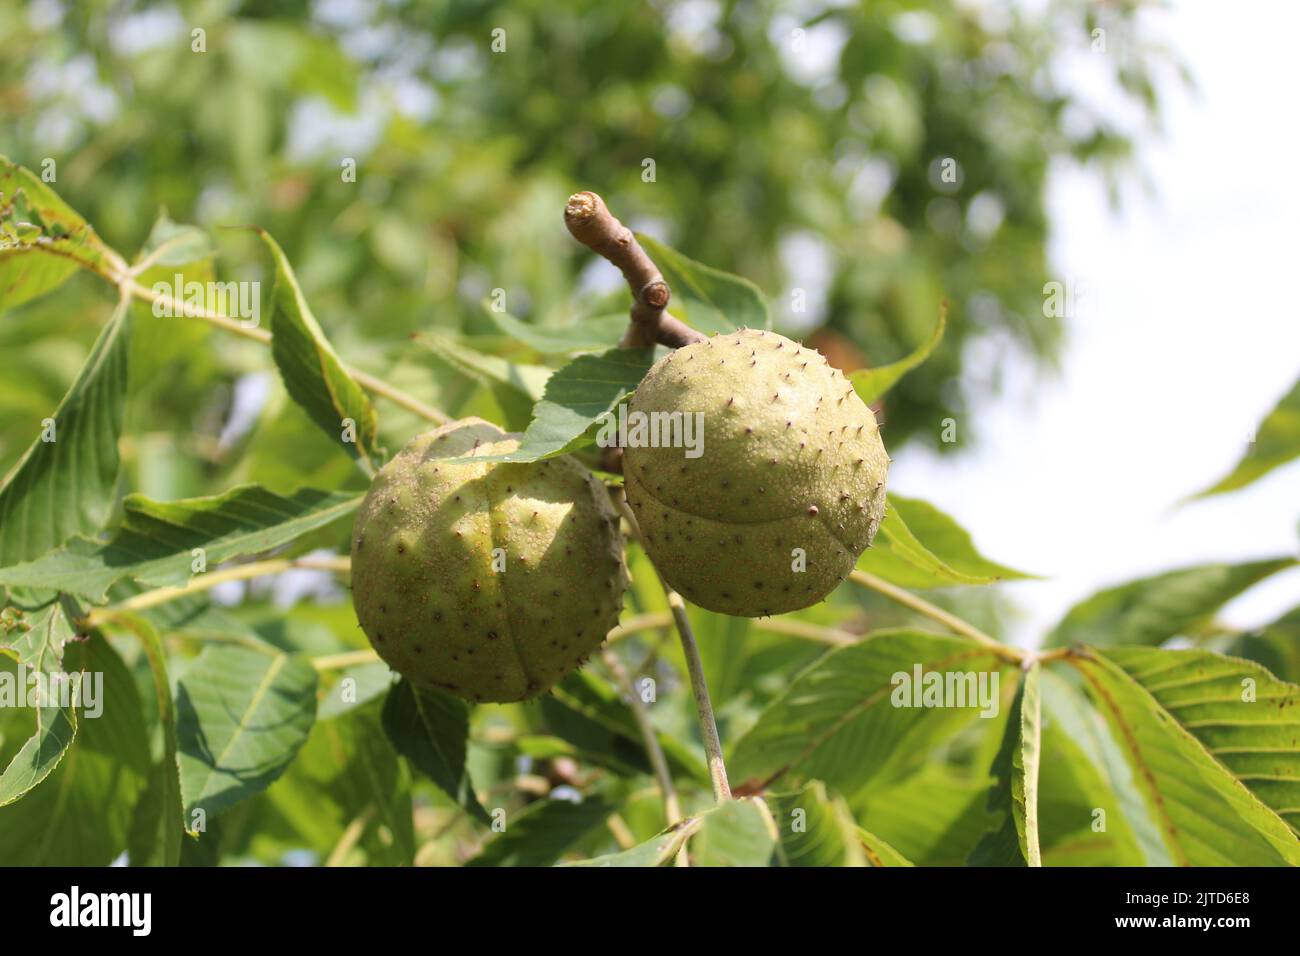 Ohio buckeye nuts at Blackwell Forest Preserve in Warrenville, Illinois Stock Photo